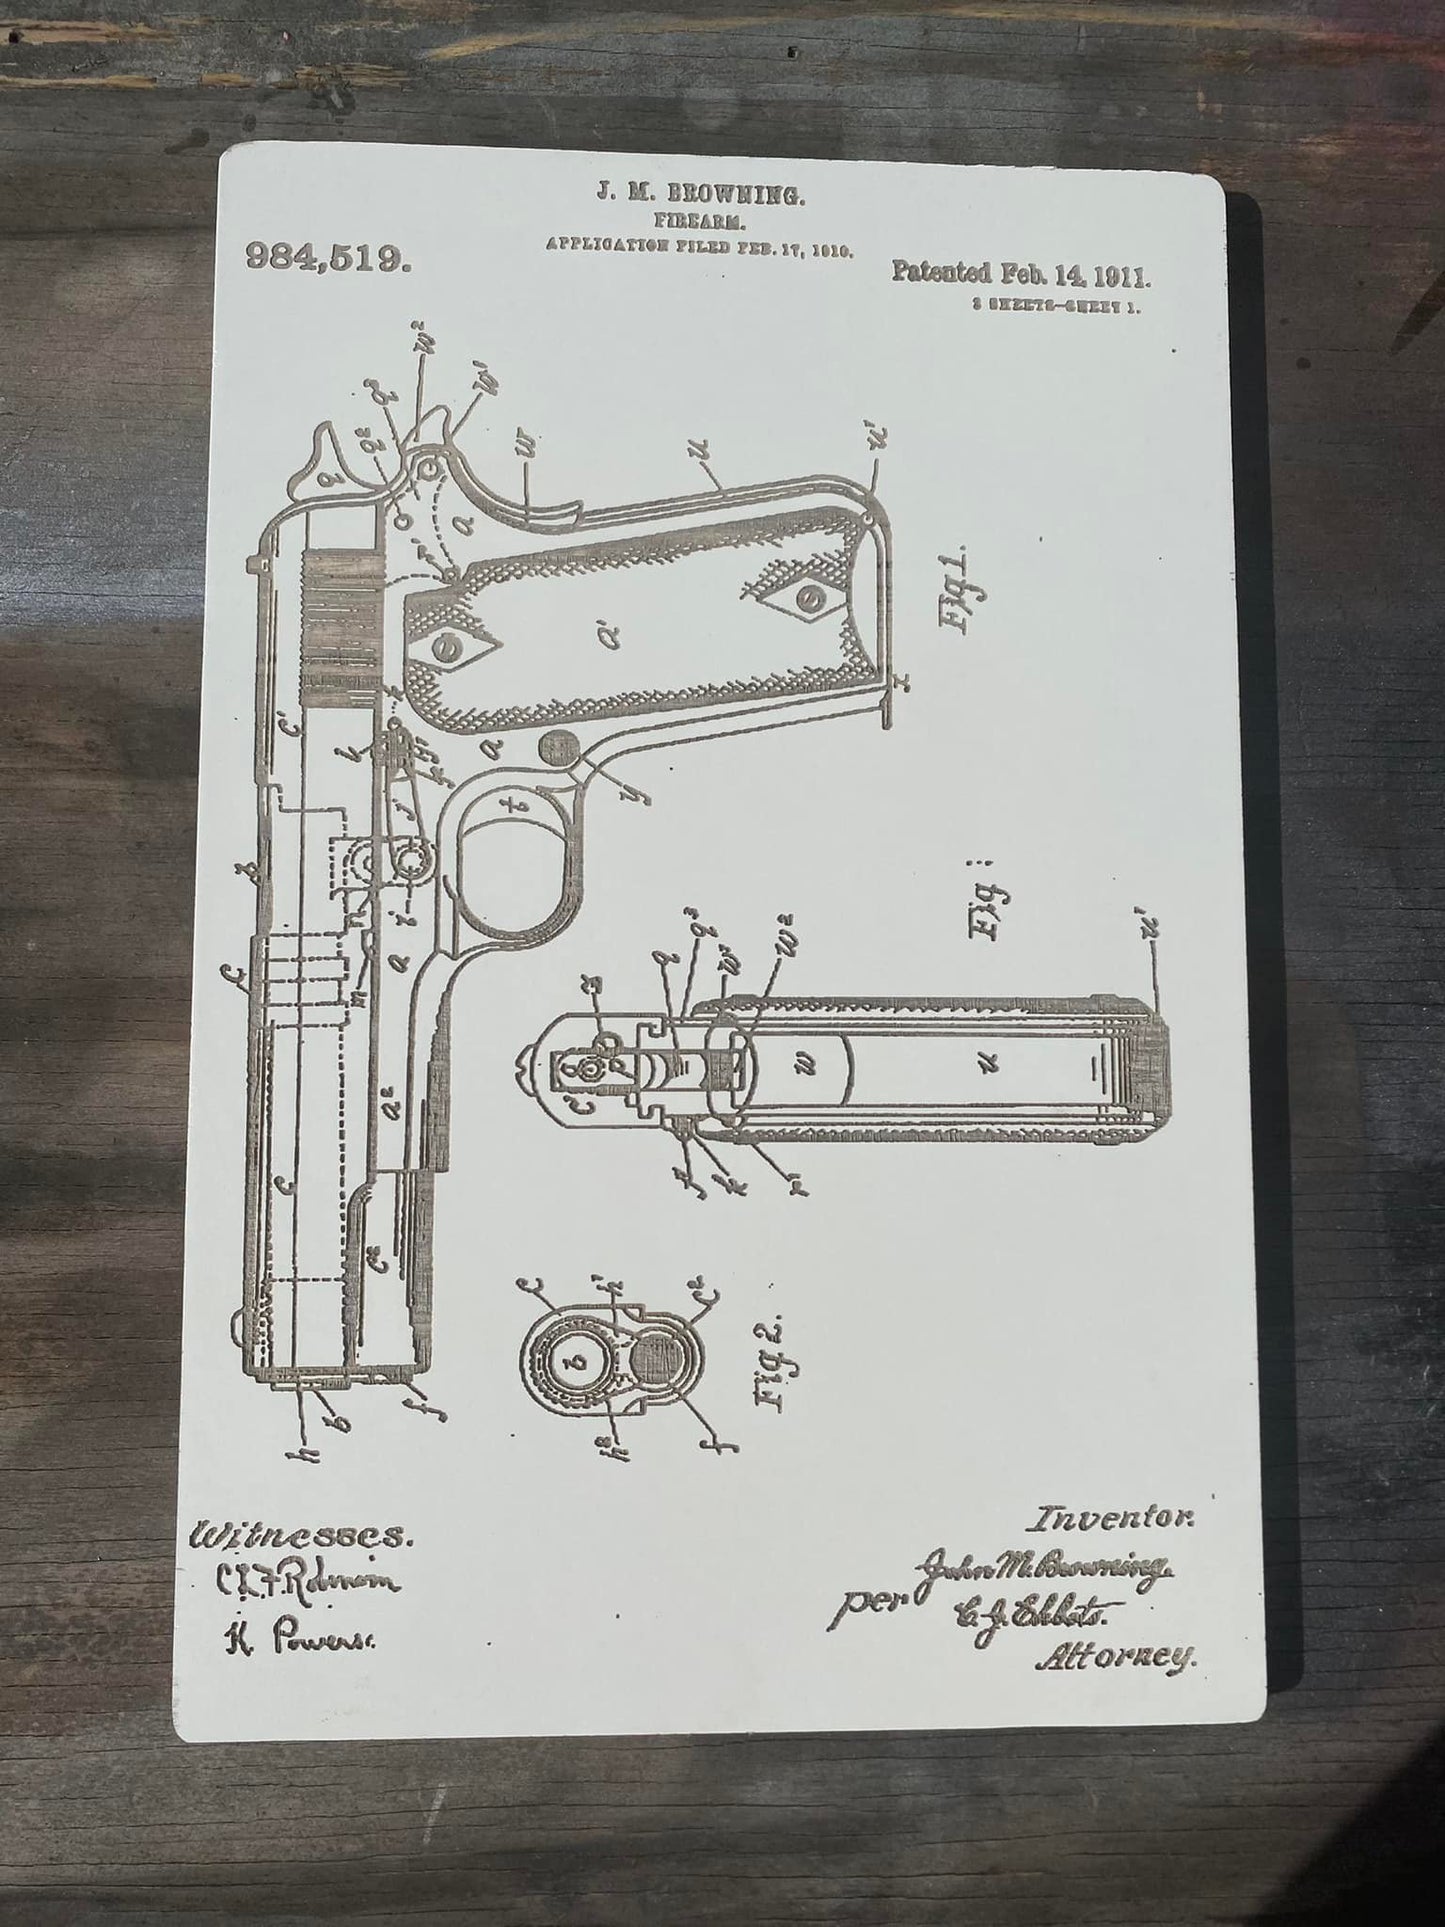 10x15 "Browning Firearm" Patent - Laser Engraved